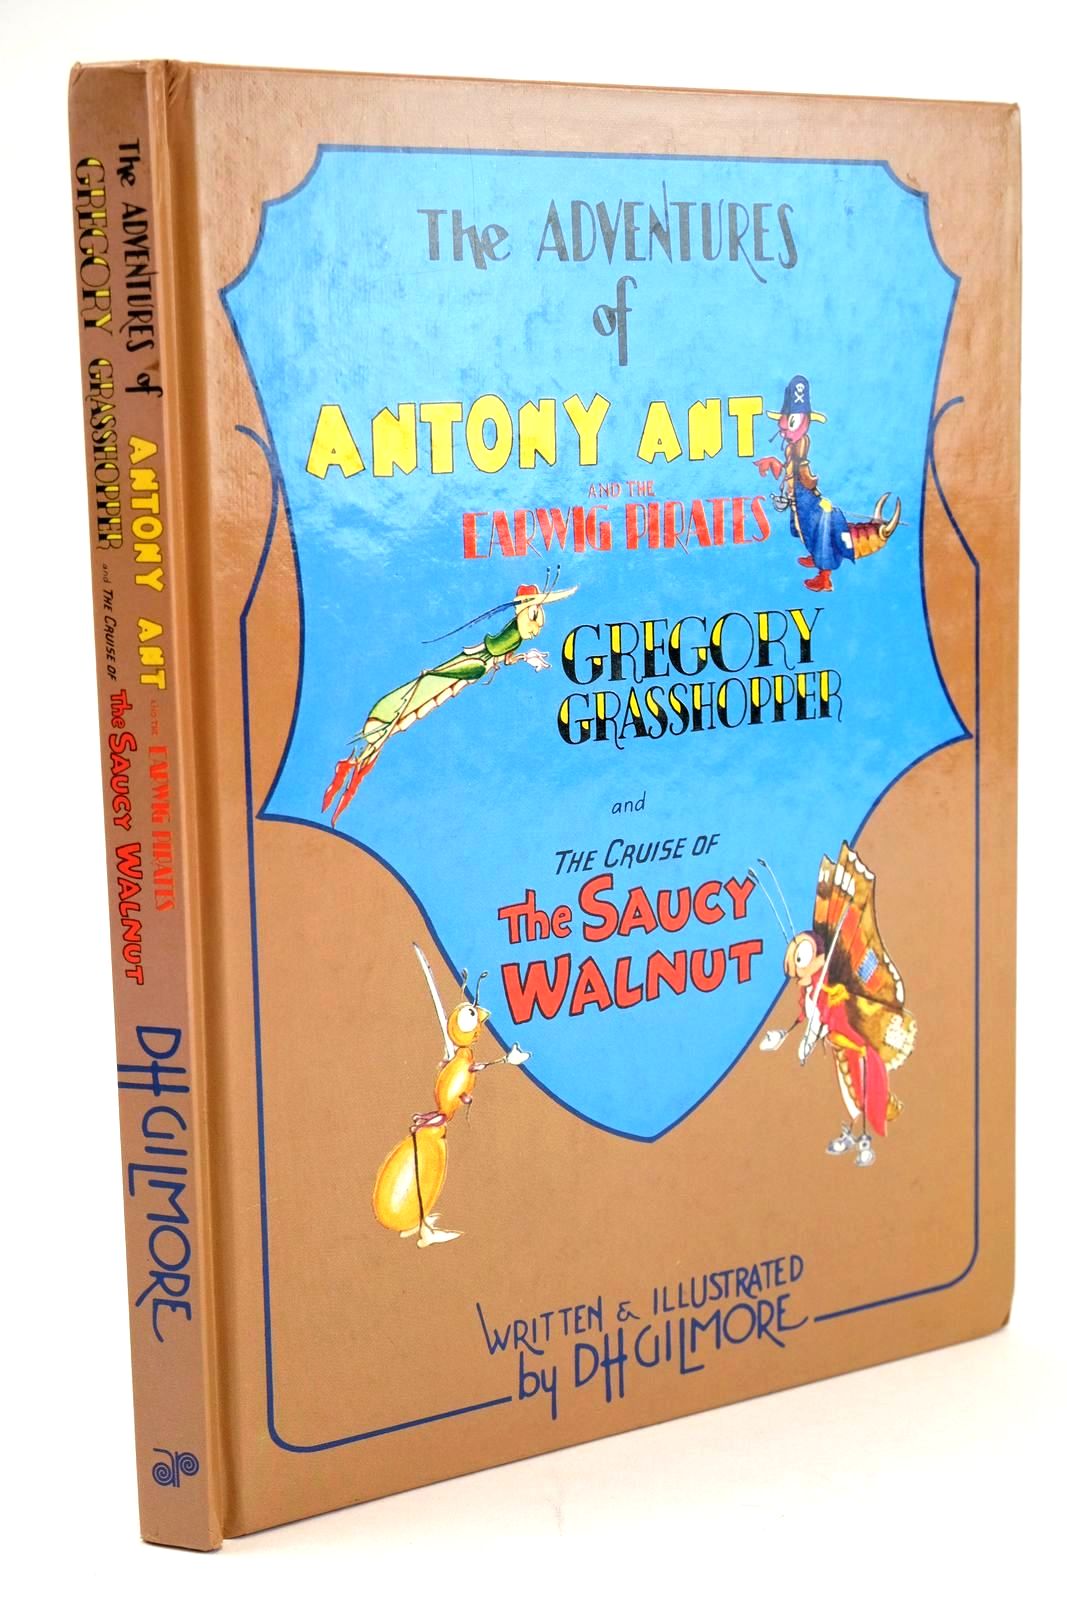 Photo of THE ADVENTURES OF ANTONY ANT AND THE EARWIG PIRATES, GREGORY GRASSHOPPER AND THE CRUISE OF THE SAUCY WALNUT- Stock Number: 1325050